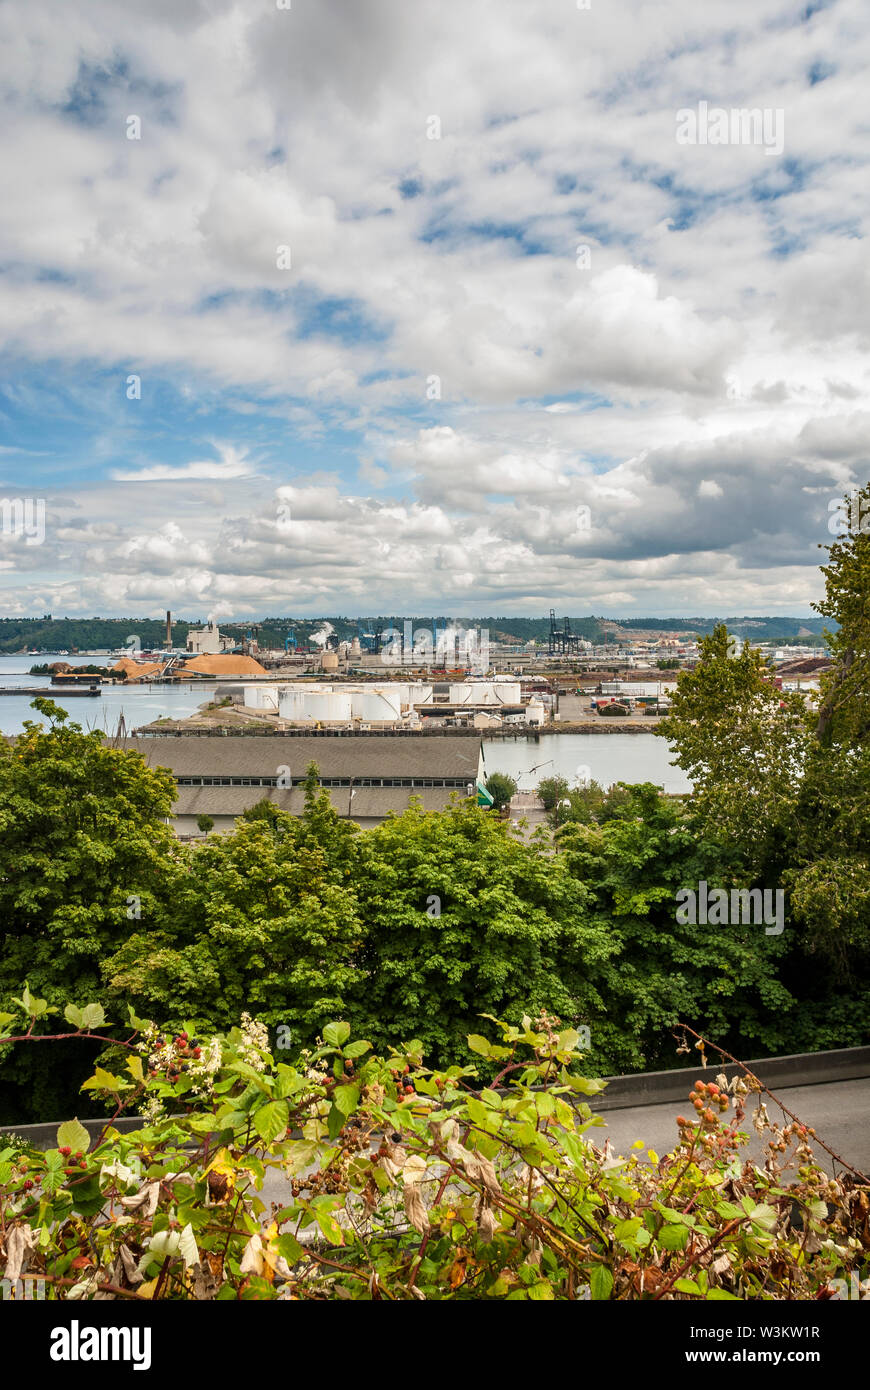 View of a waterway with industrial facilities in Tacoma, Washington. Stock Photo